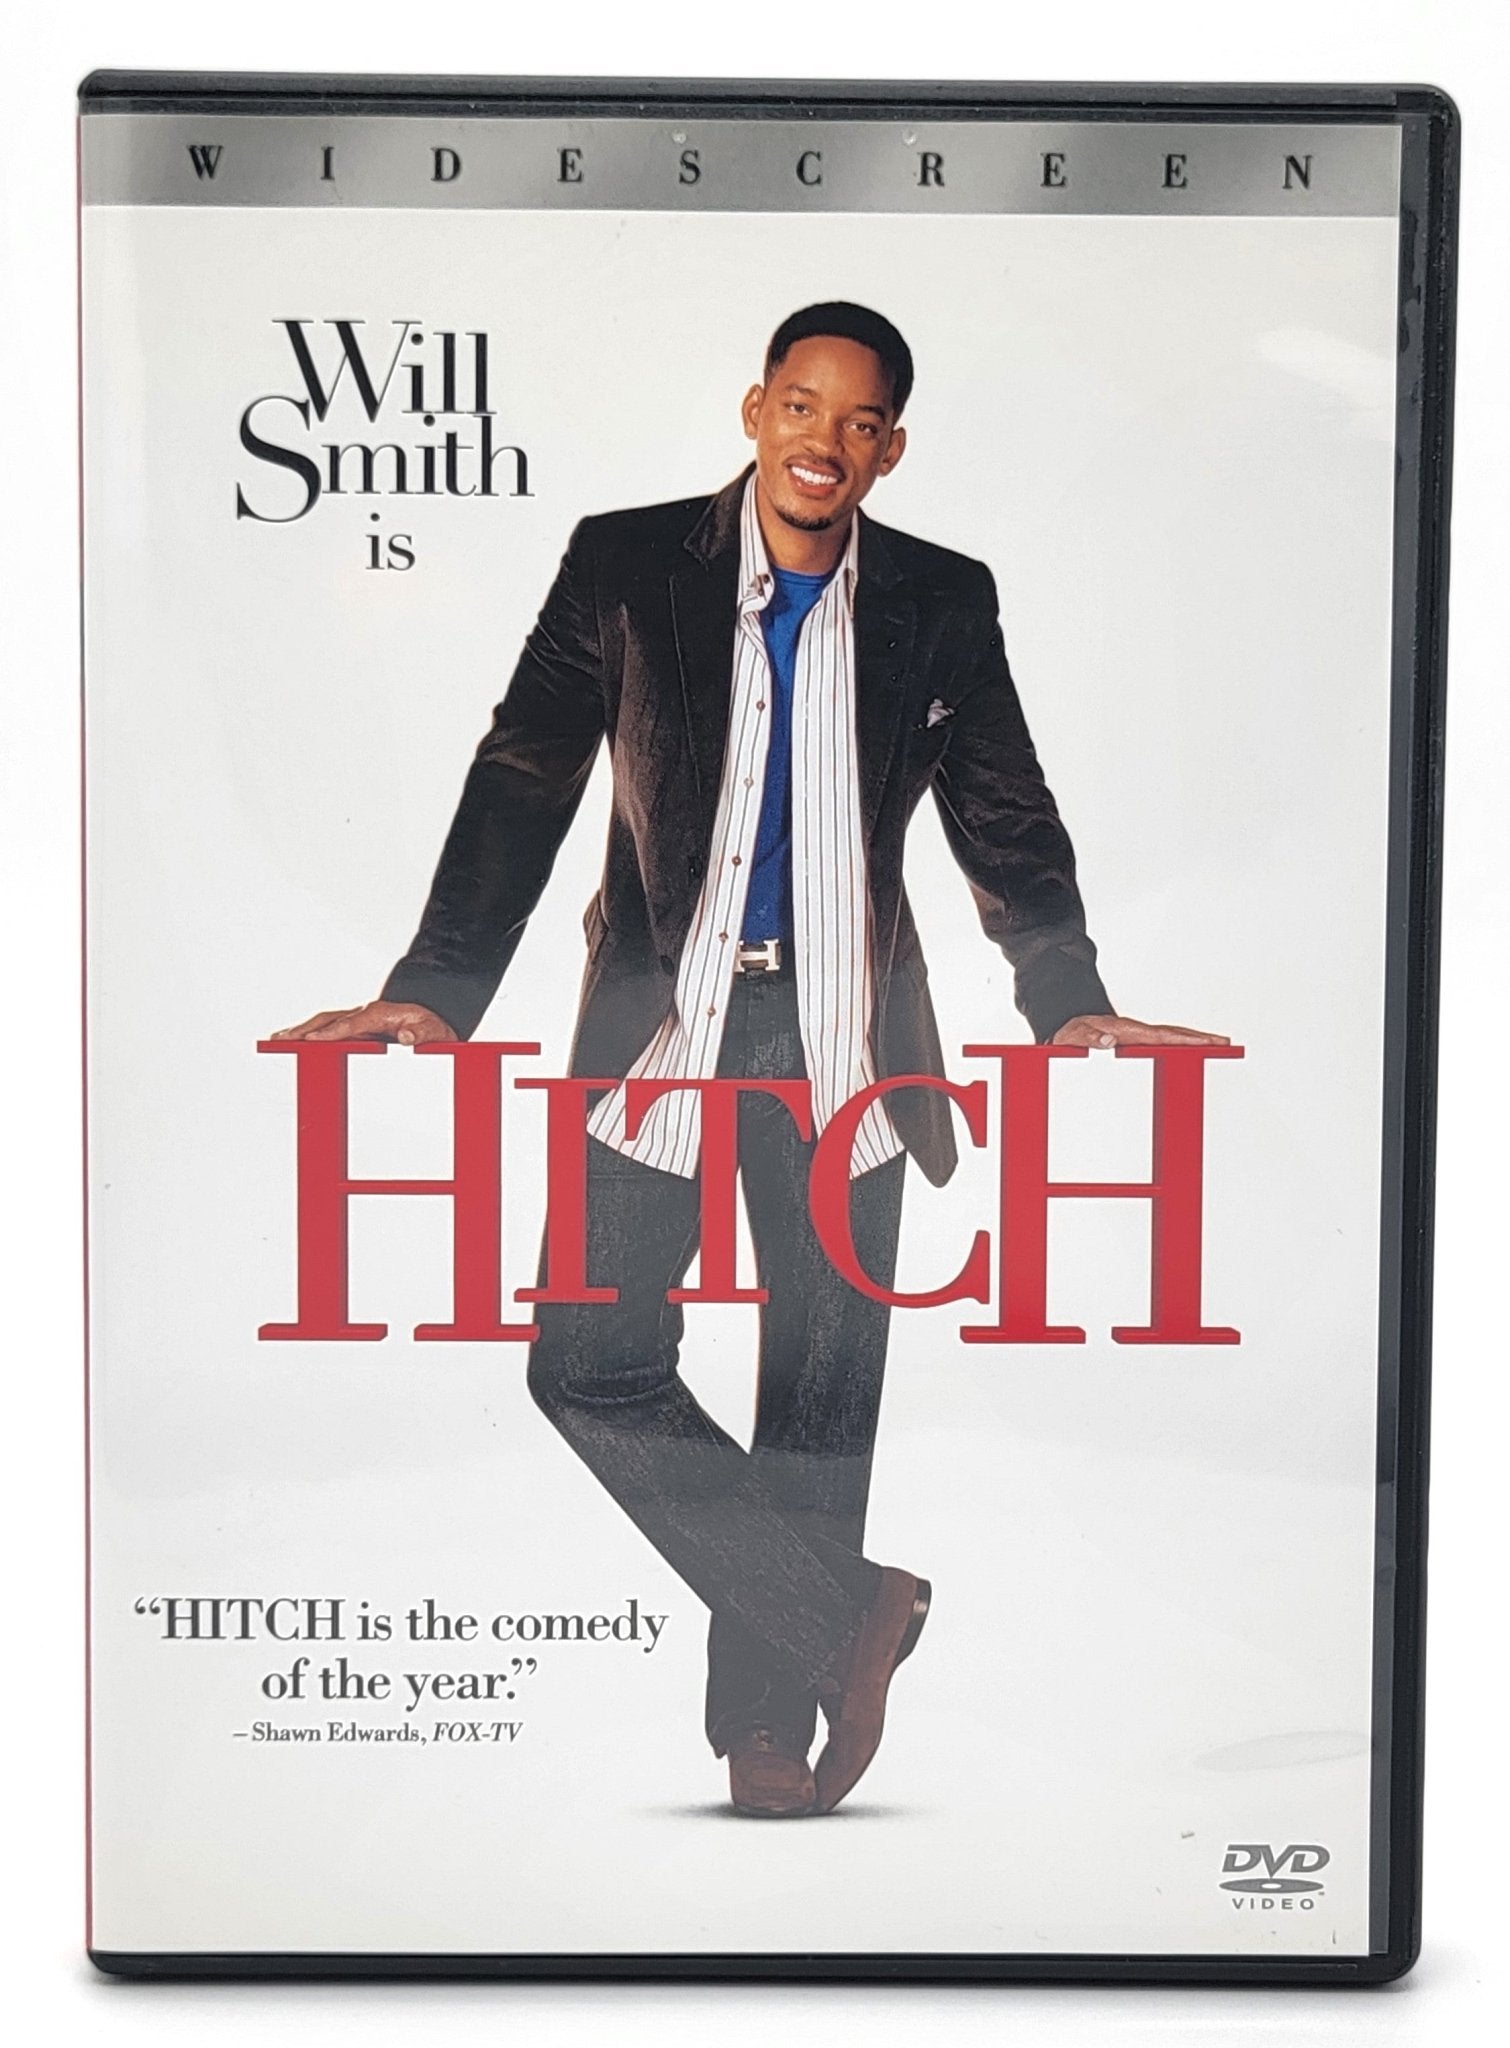 Columbia Pictures - Hitch | DVD | Widescreen - DVD - Steady Bunny Shop